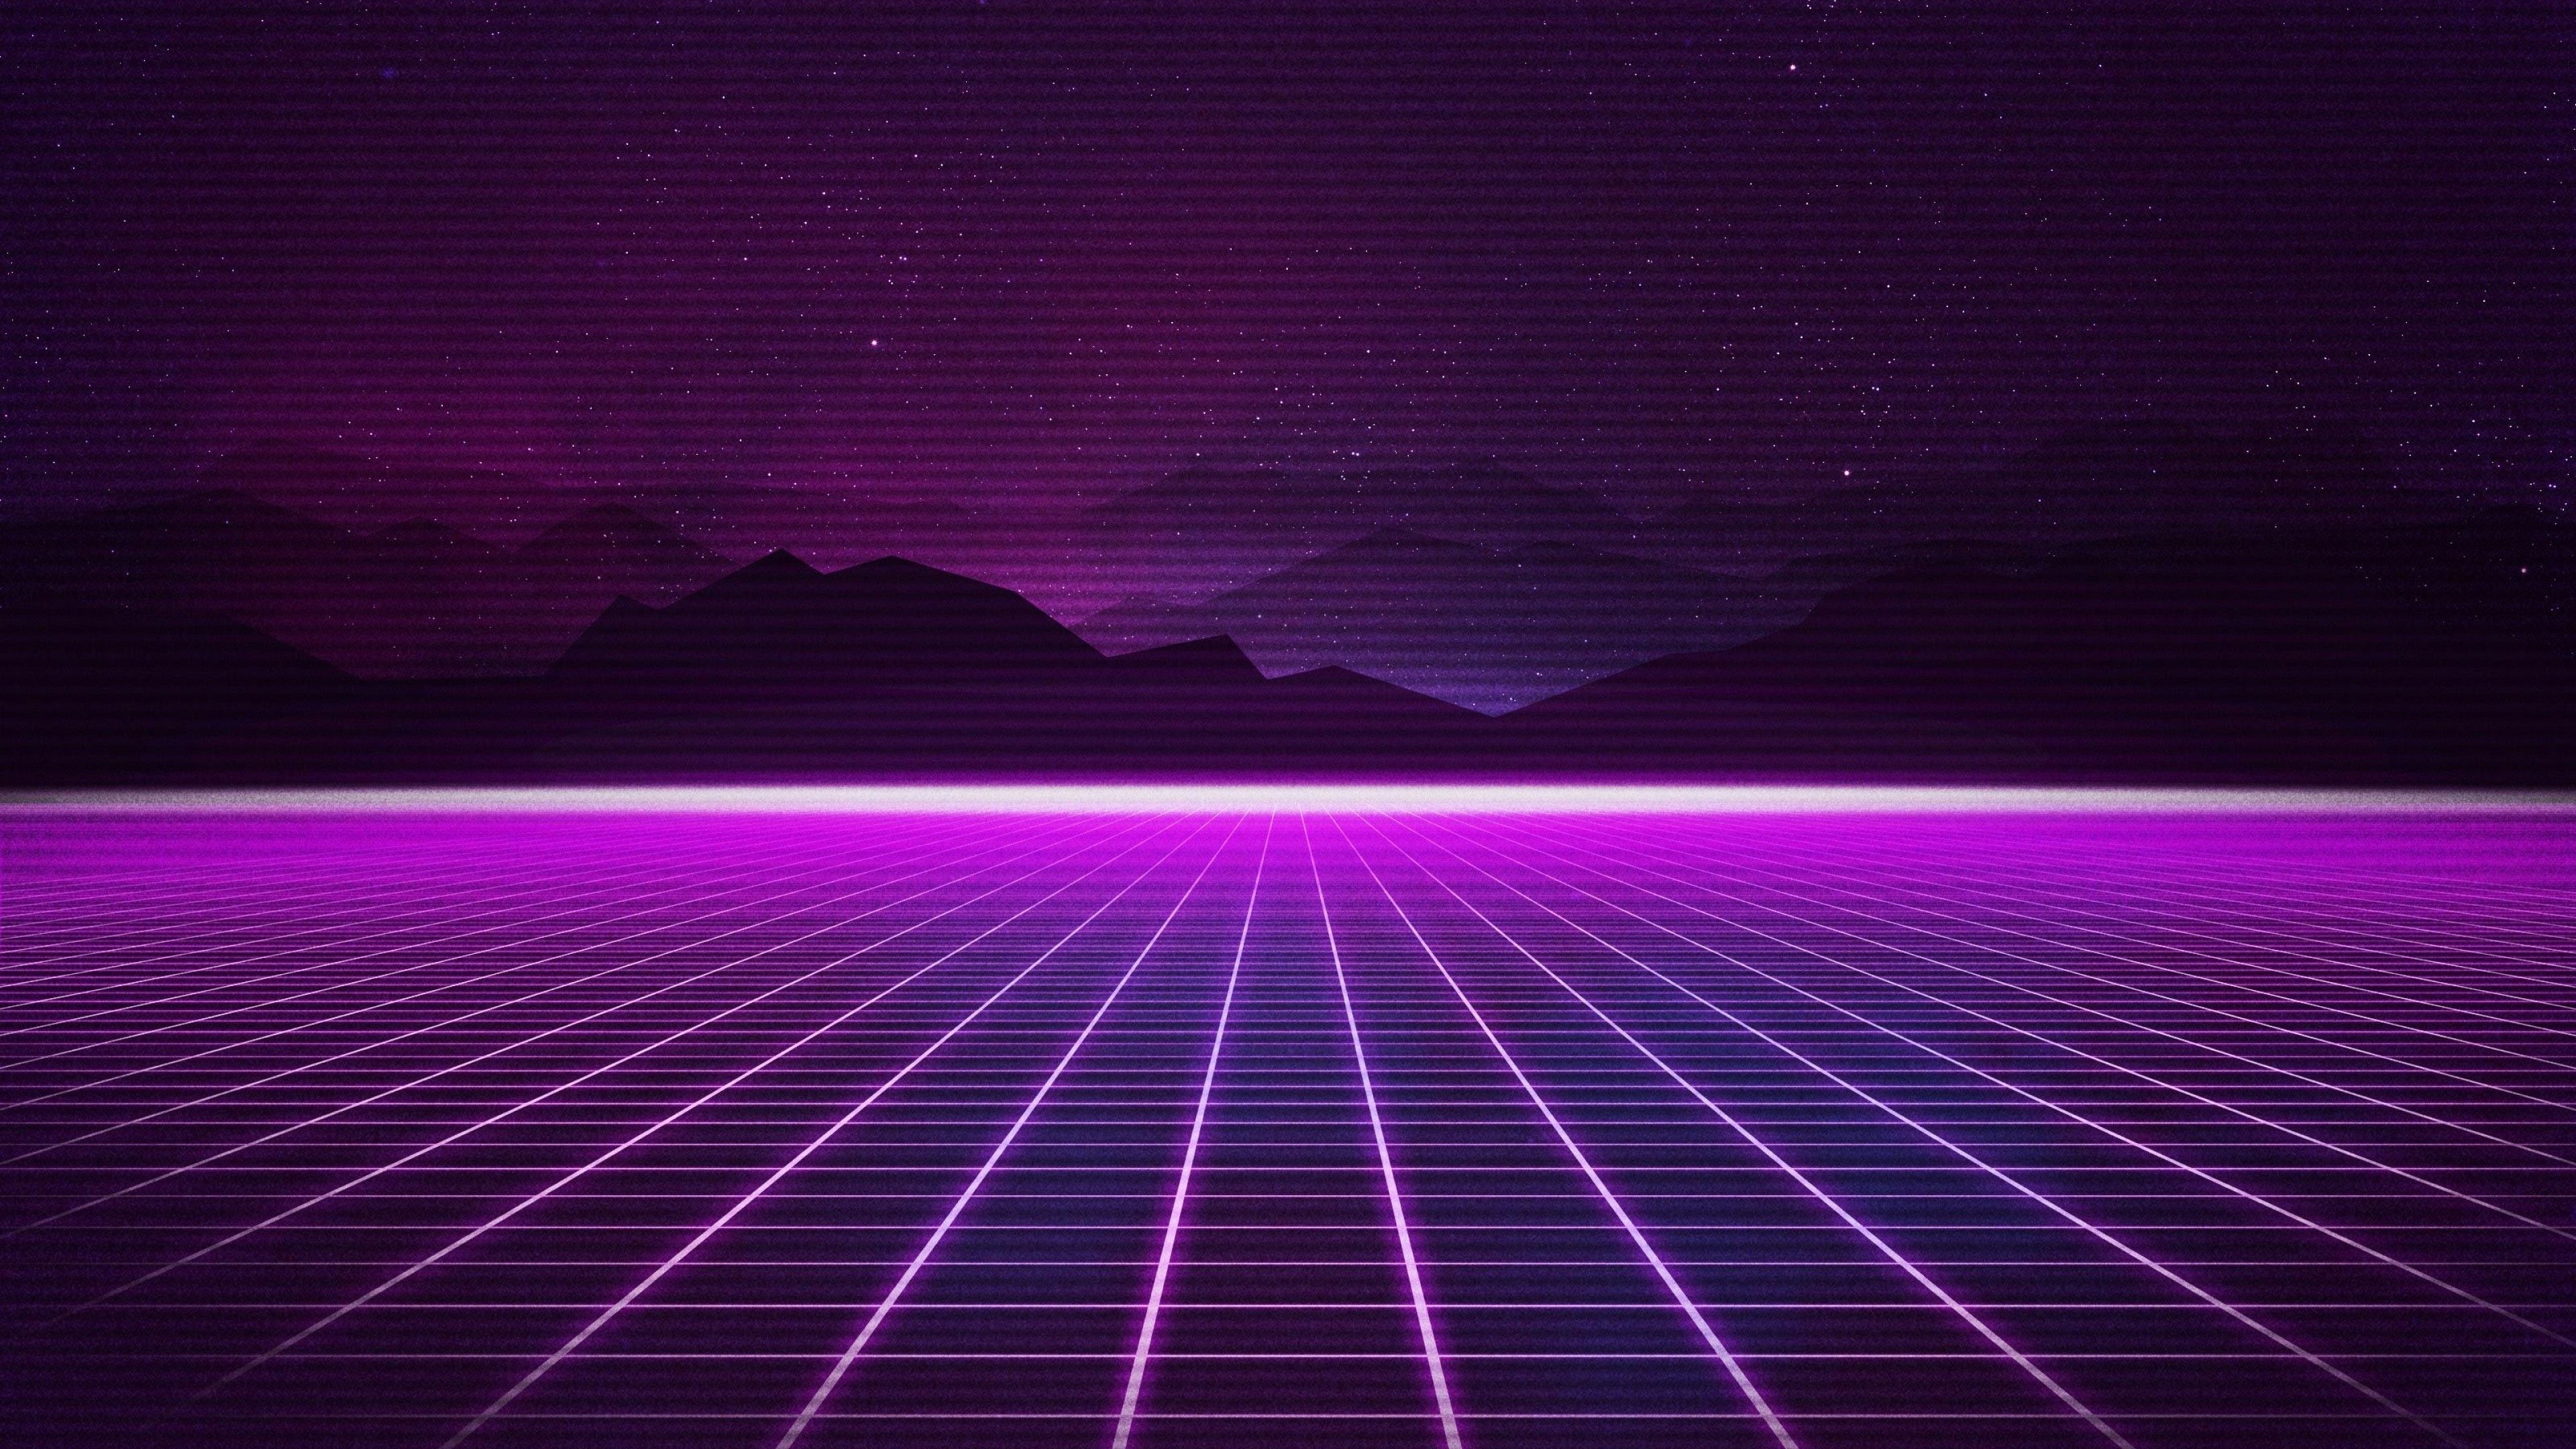 Wallpaper Neon, Synthwave, Retrowave, Grid, Mountains, Purple, HD, Creative Graphics,. Wallpaper for iPhone, Android, Mobile and Desktop